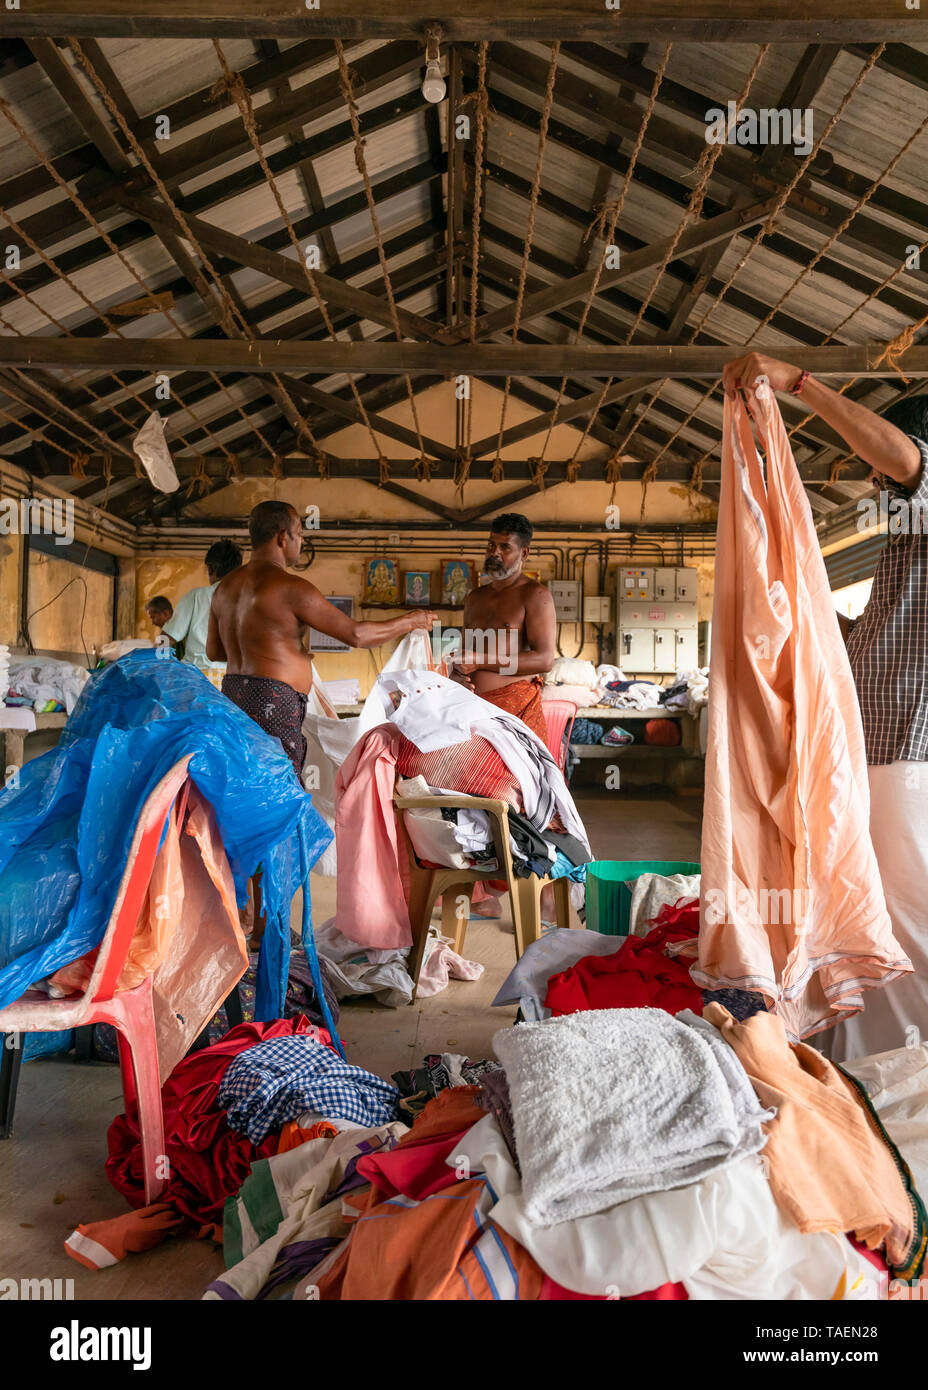 Vertical view of dhobi wallahs folding up clean clothes in India. Stock Photo